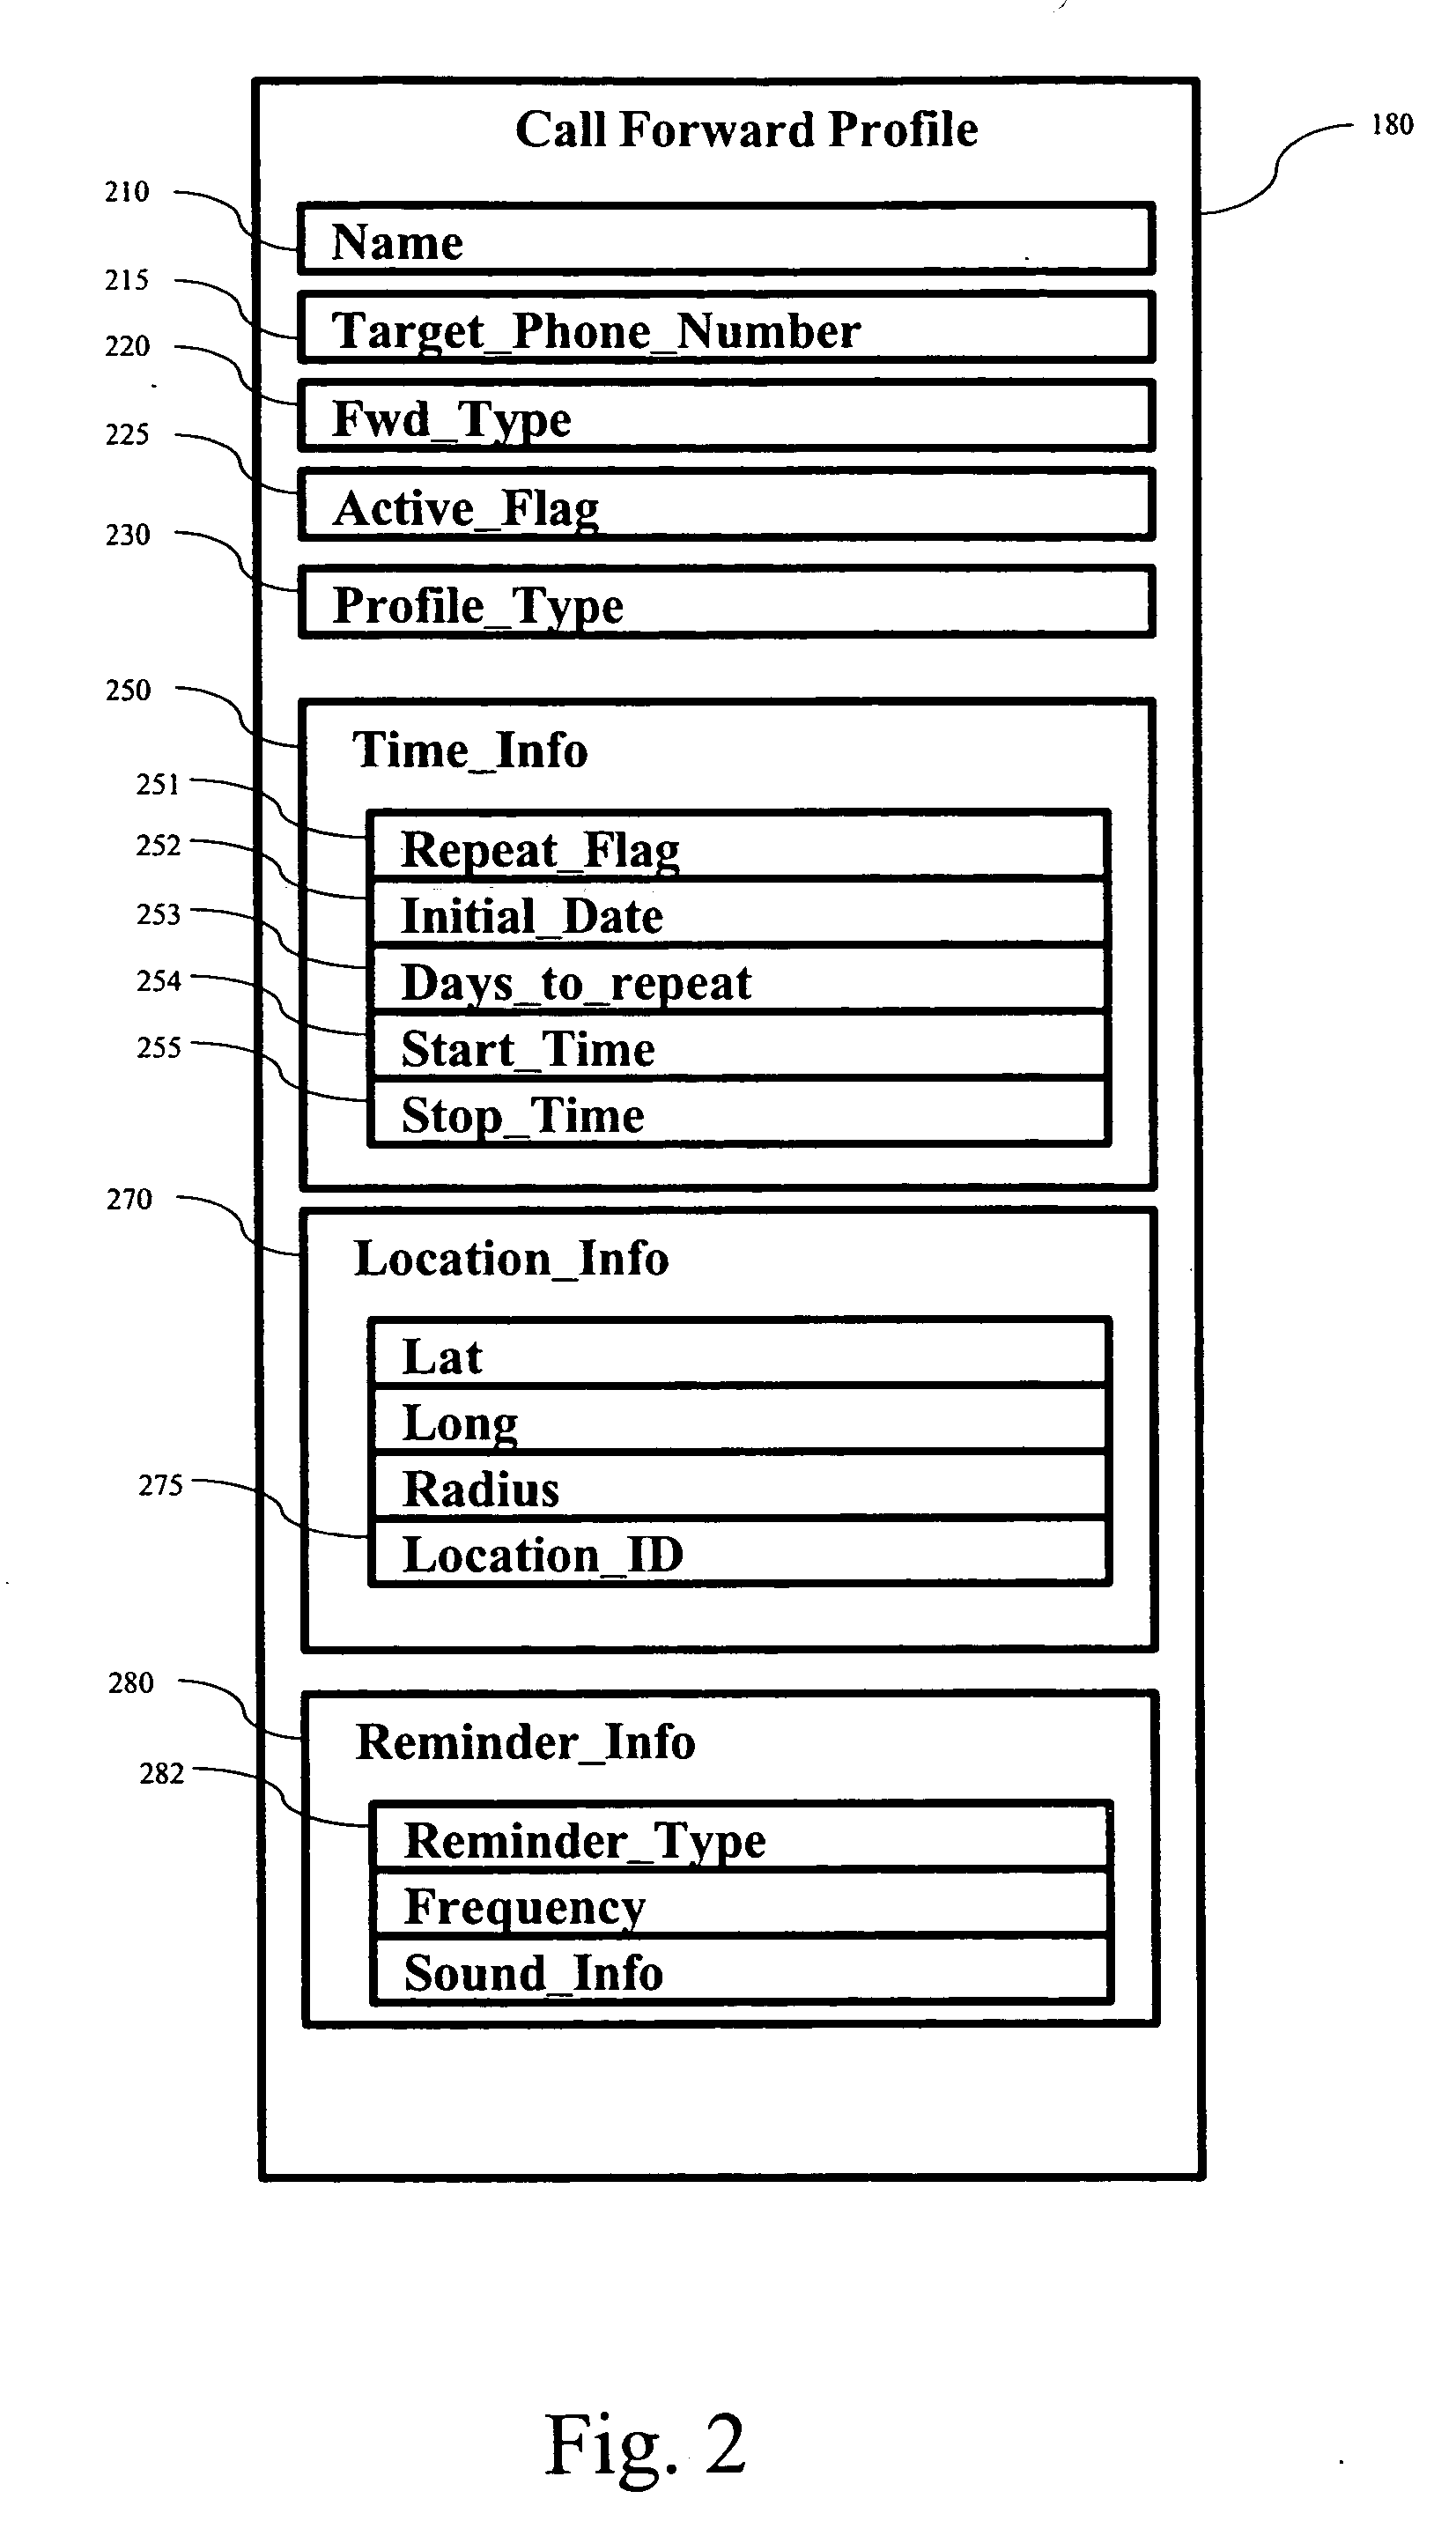 Automatic mobile call forwarding with time-based and location-based trigger events